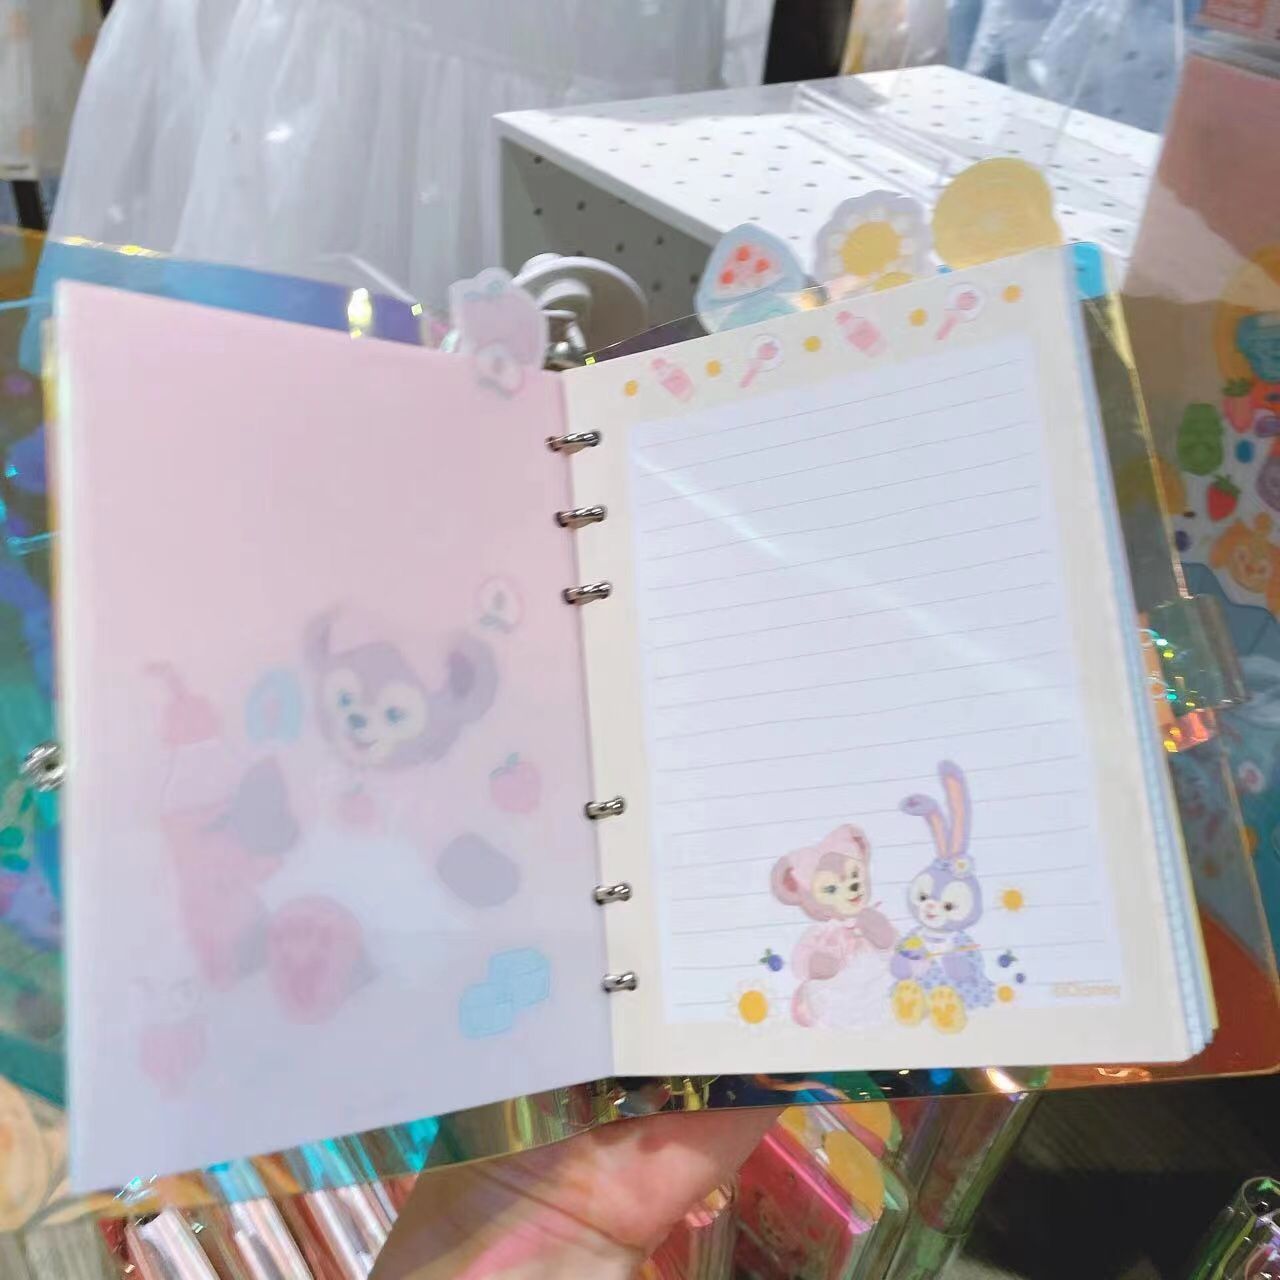 SHDL - Duffy and friends notebook